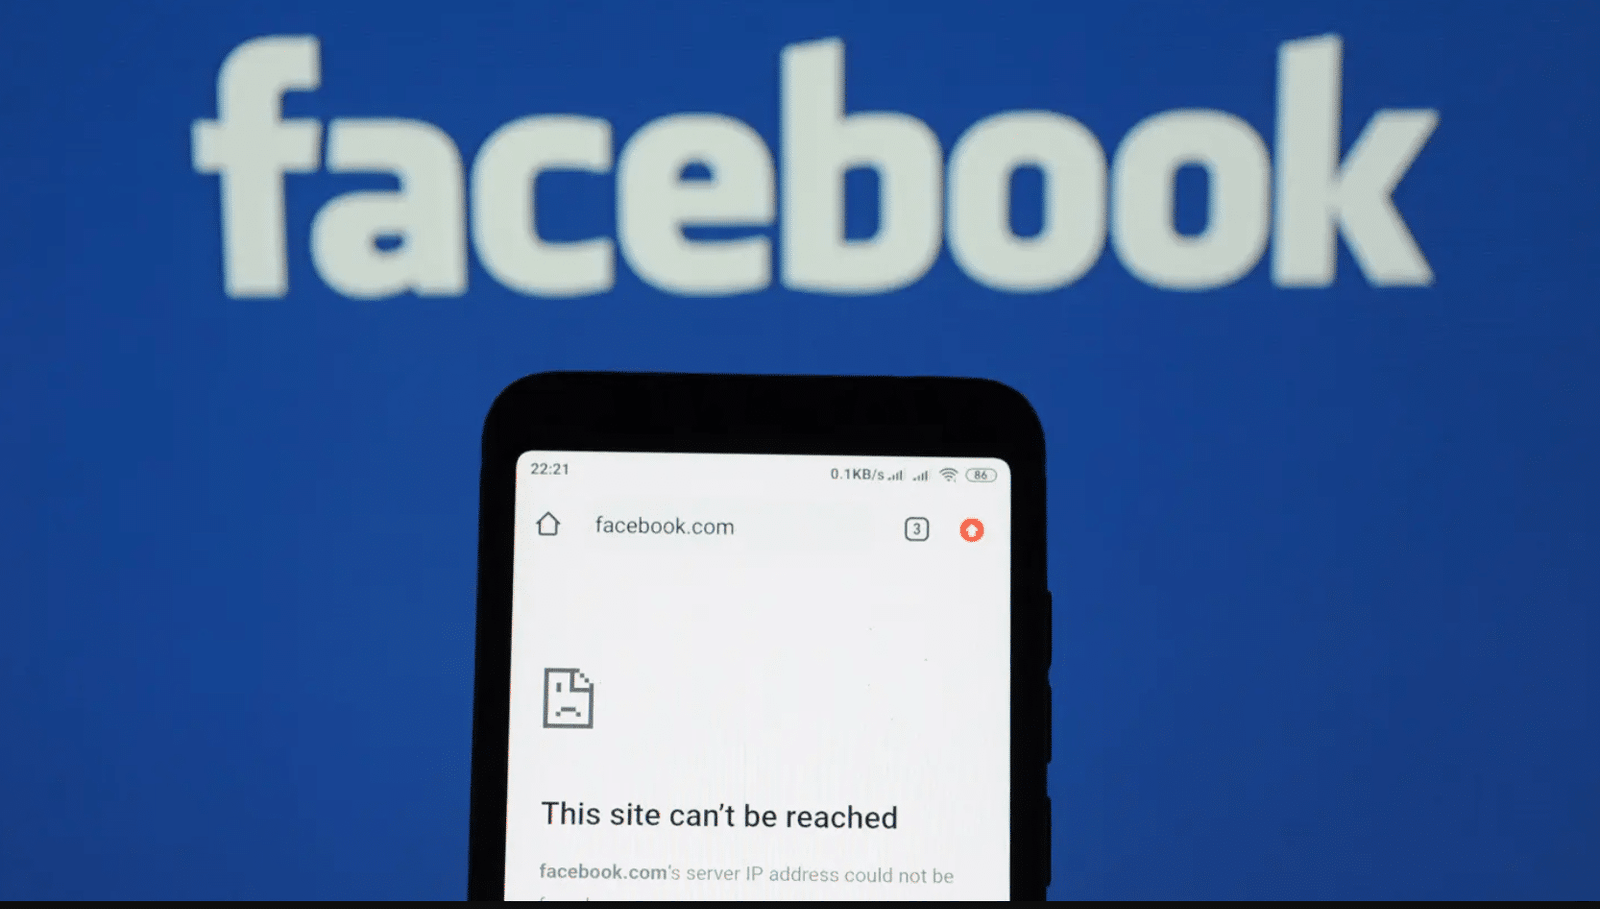 Facebook Instagram and Messenger are back up and running after a social media blackout | Report Focus News